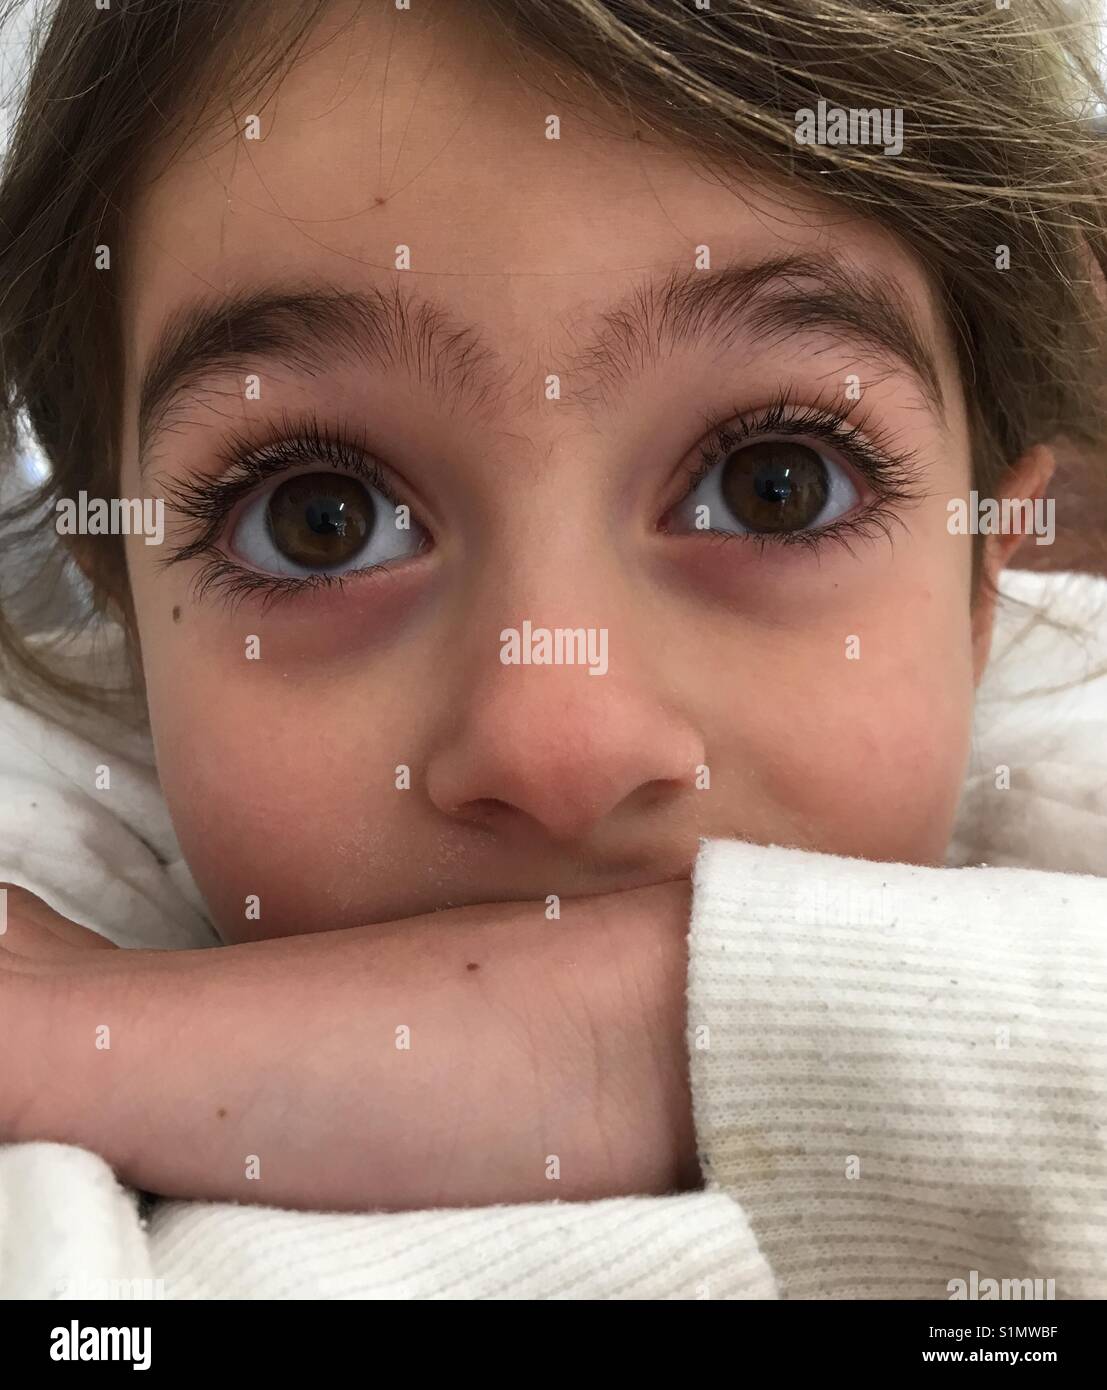 Little girl with big brown eyes Stock Photo